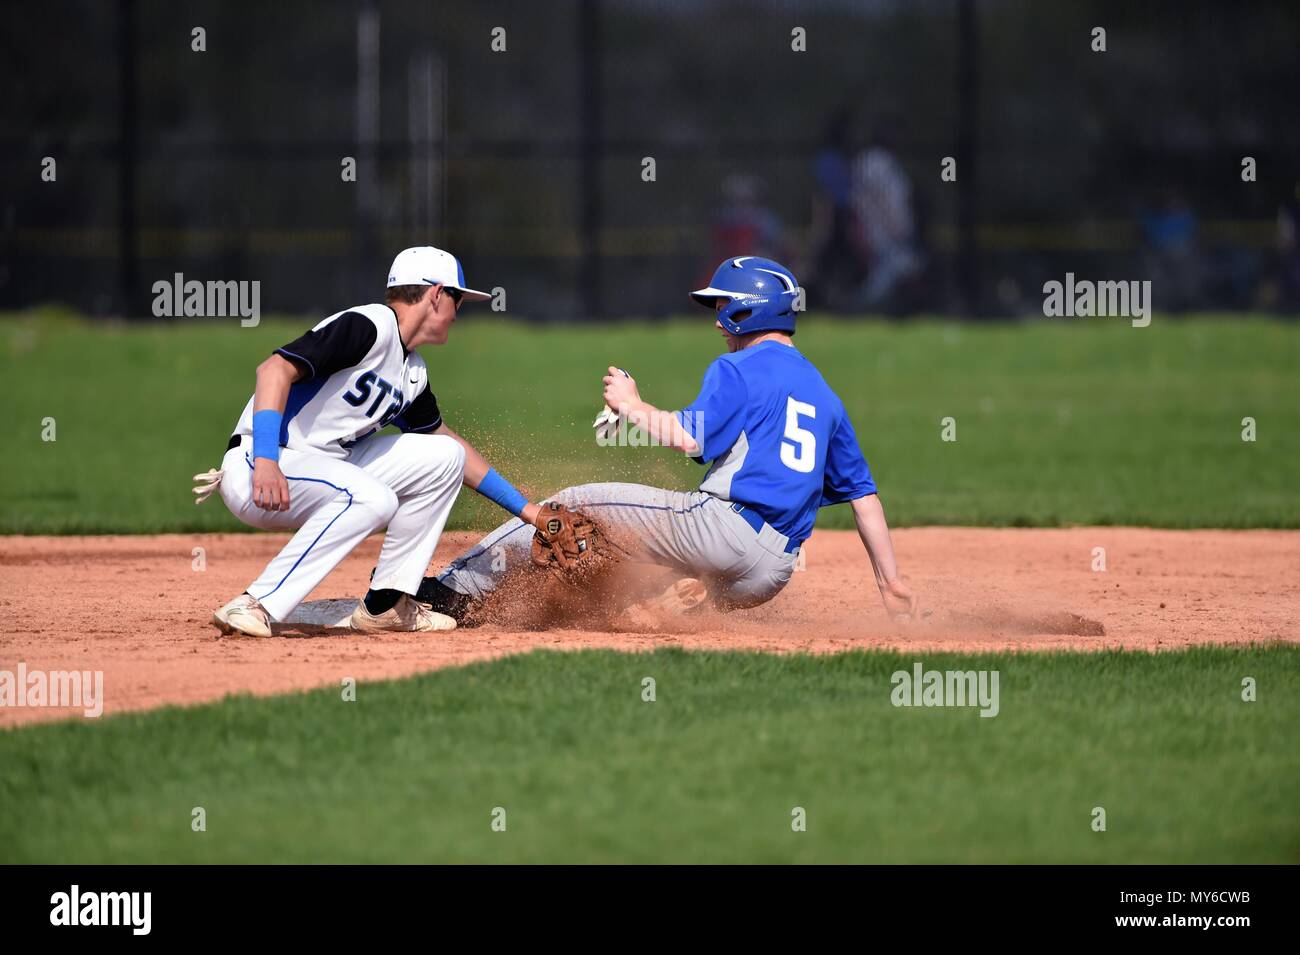 Middle infielder accepting a throw too late to prohibit an opponent base runner from stealing second base. USA. Stock Photo